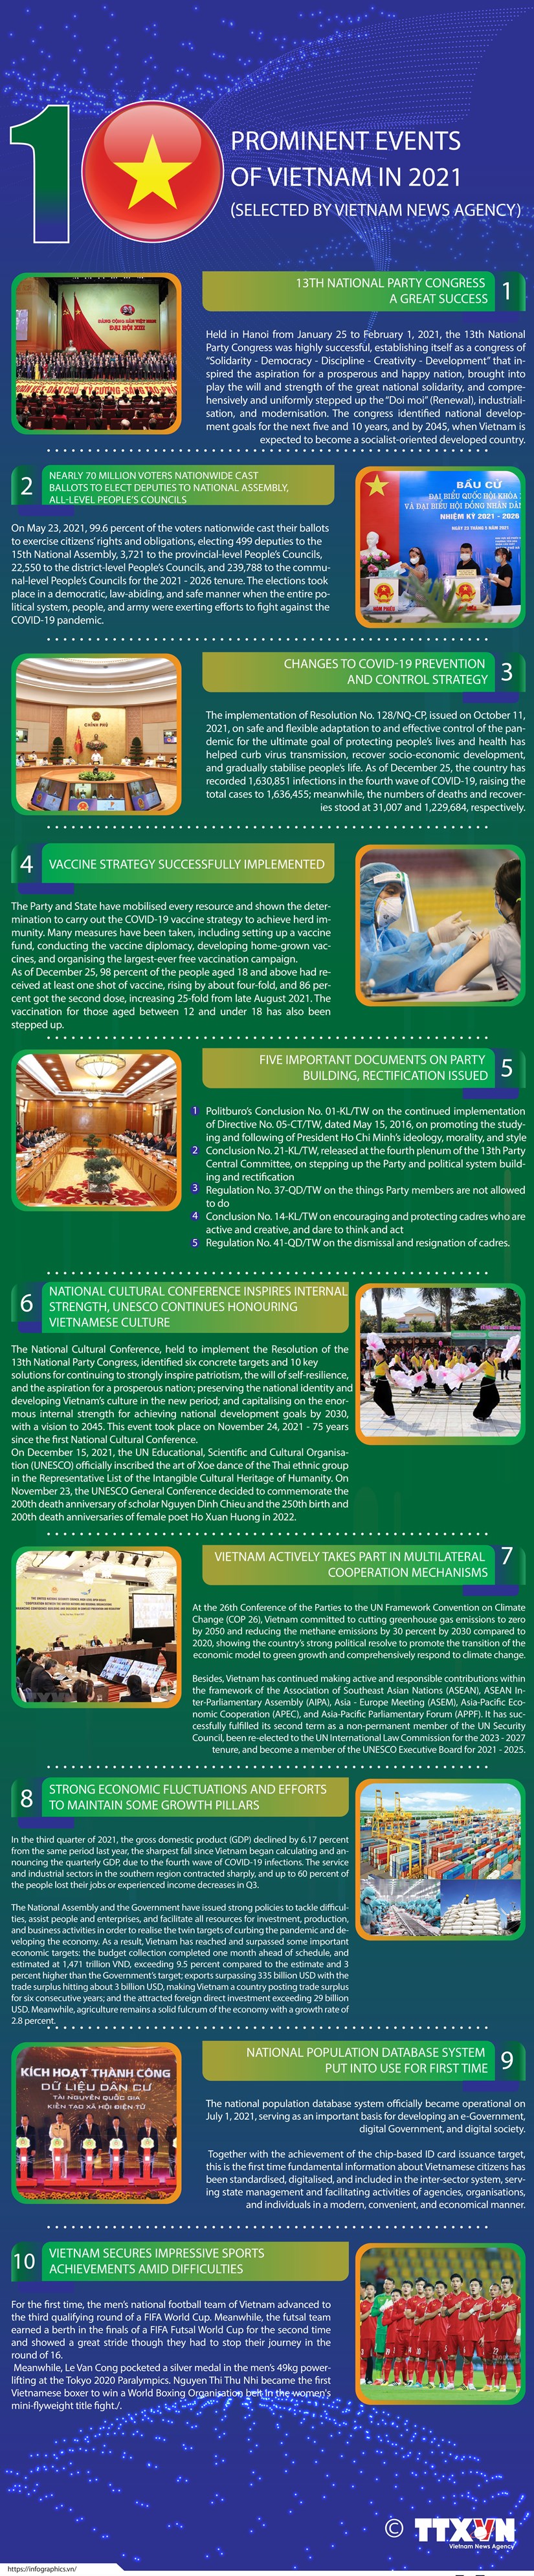 Top 10 prominent events of Vietnam in 2021 selected by VNA hinh anh 1